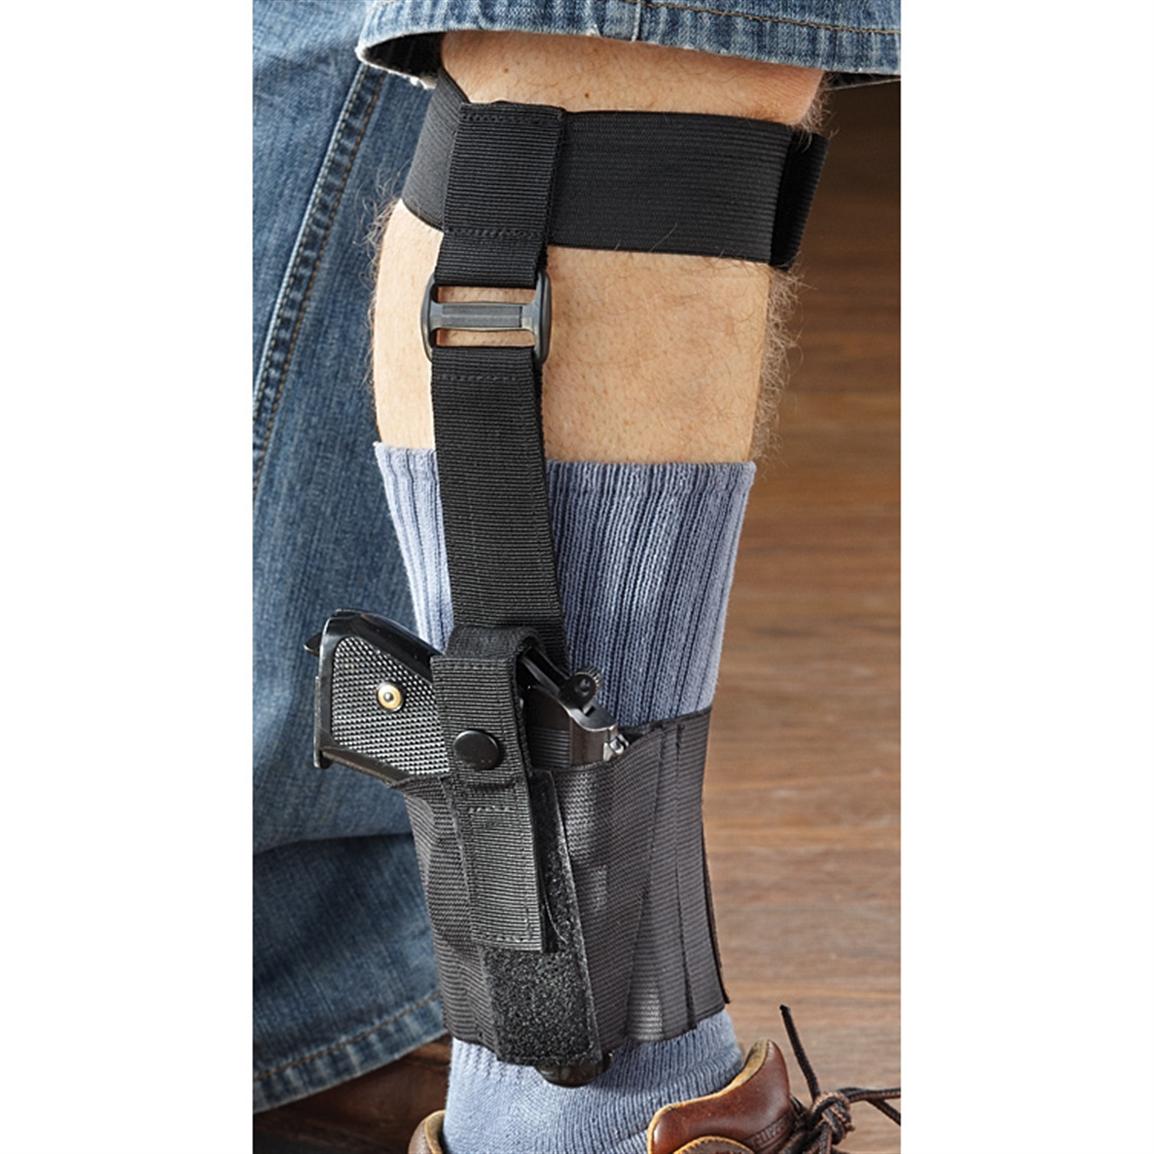 Fox Tactical Small Frame Ankle Holster